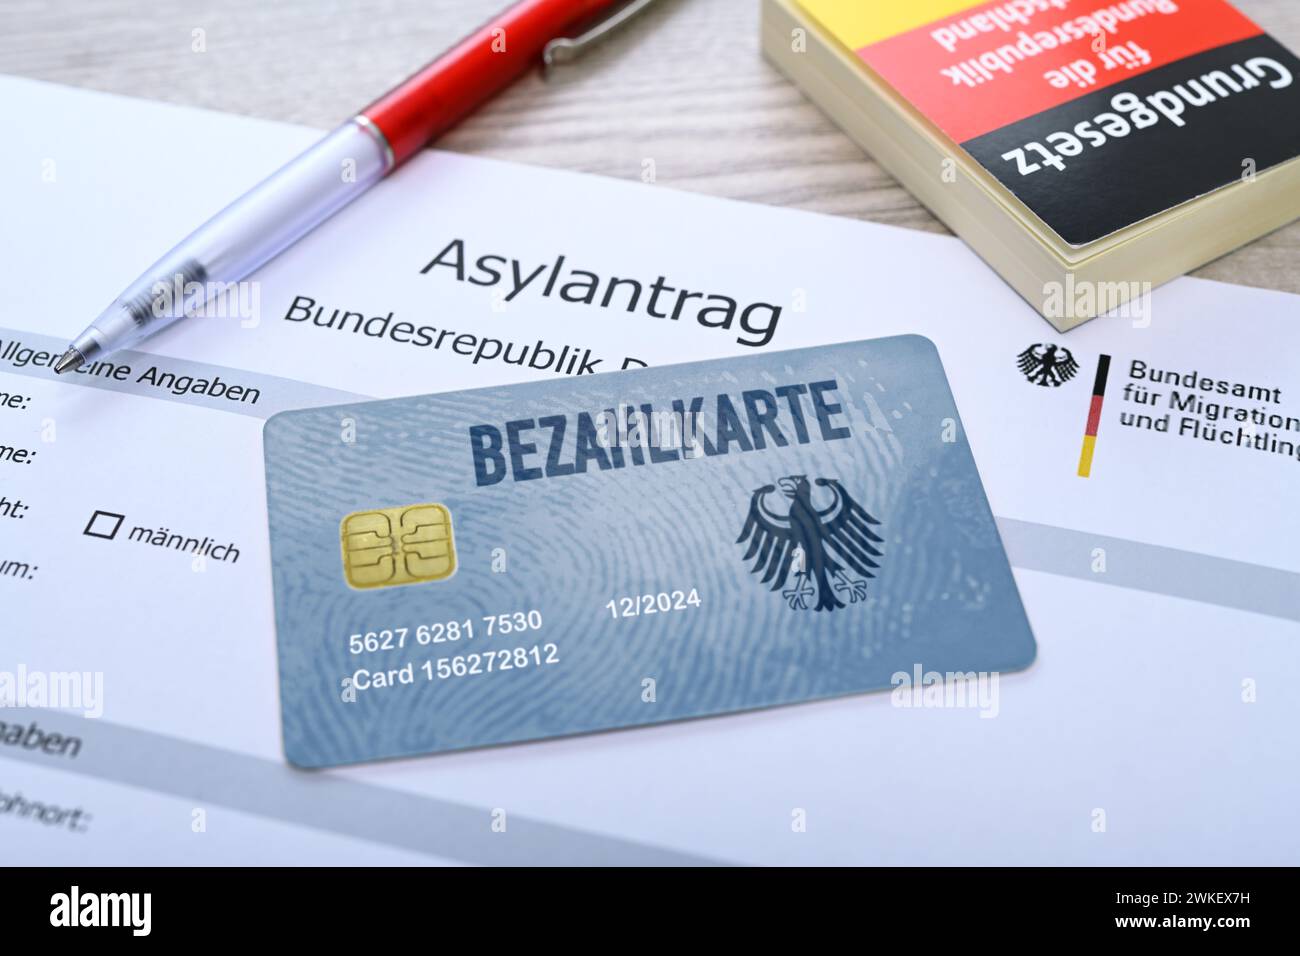 Payment Card For Refugees And Asylum Seekers On An Asylum Application, Symbol Photo, Photomontage Stock Photo